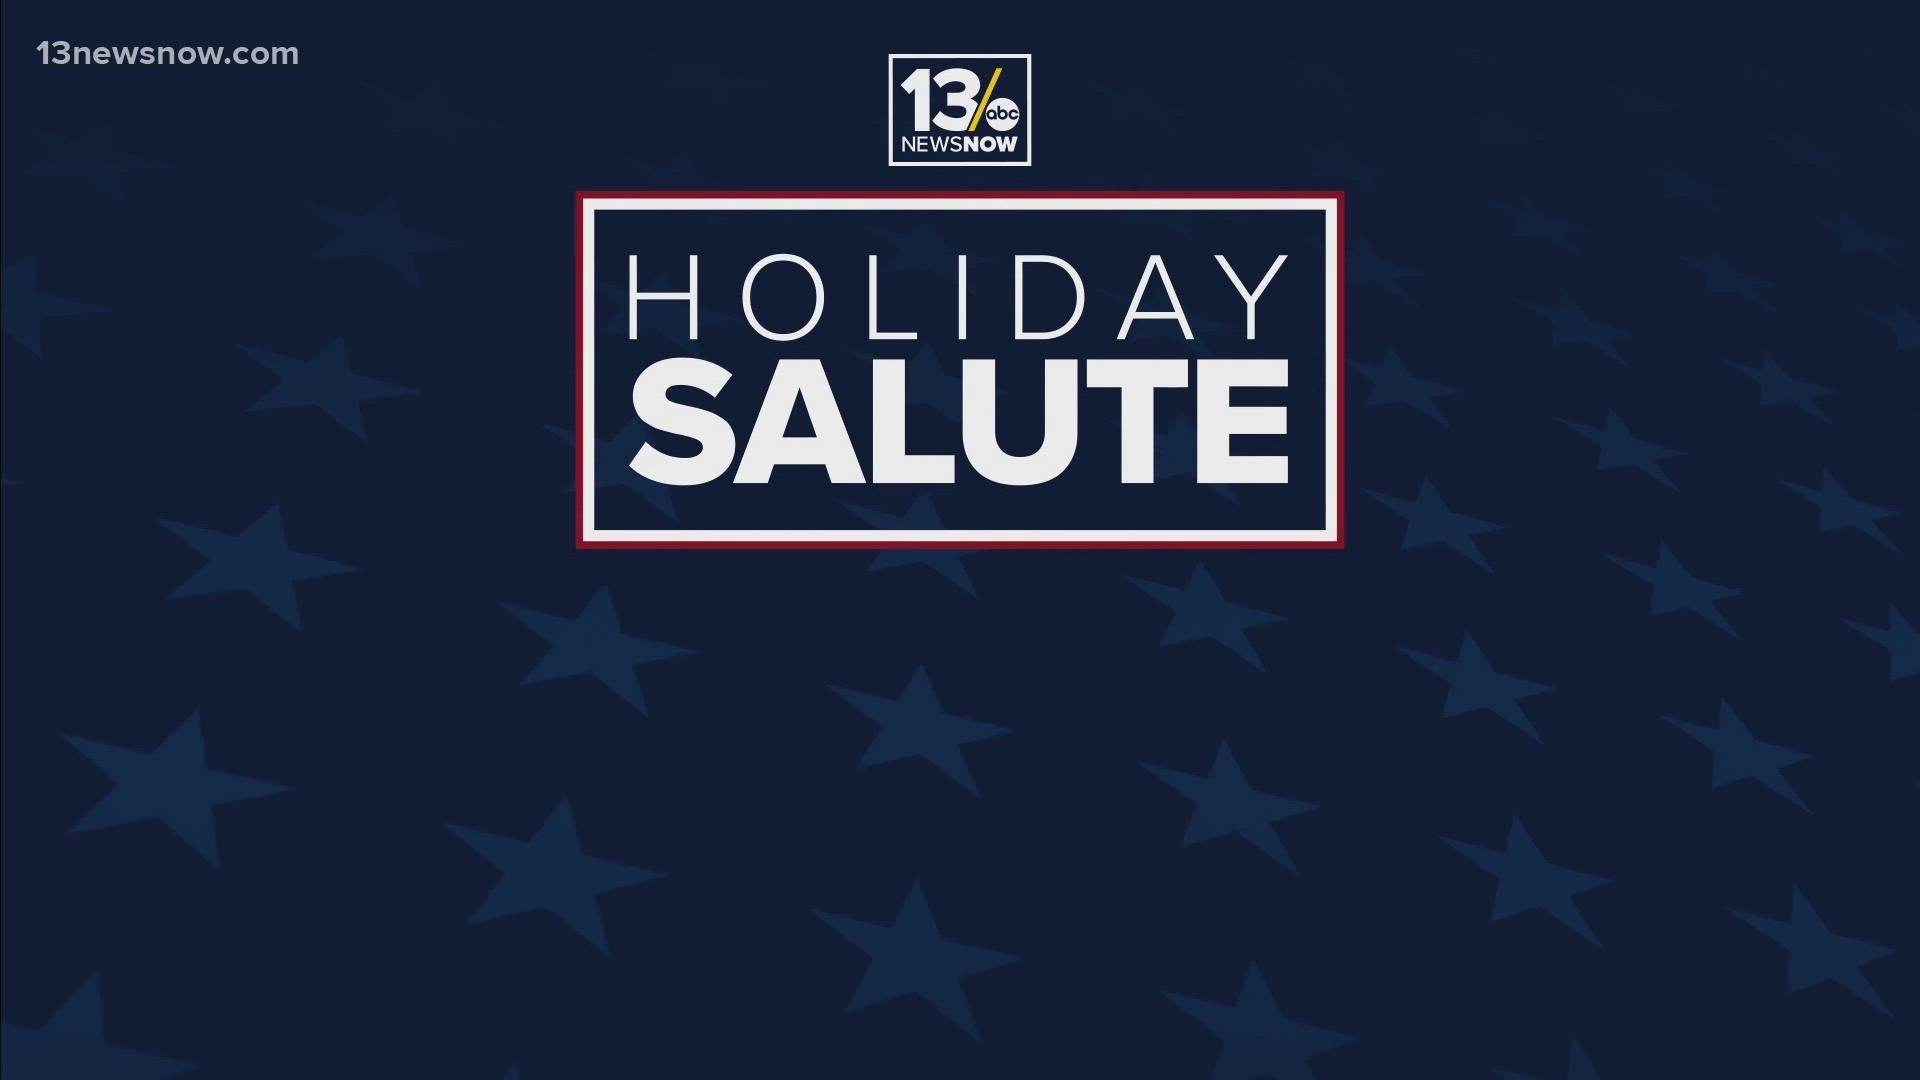 It's our station's annual tradition that recognizes service members and military families across Hampton Roads: Holiday Salute - A Tribute to Our Armed Forces!